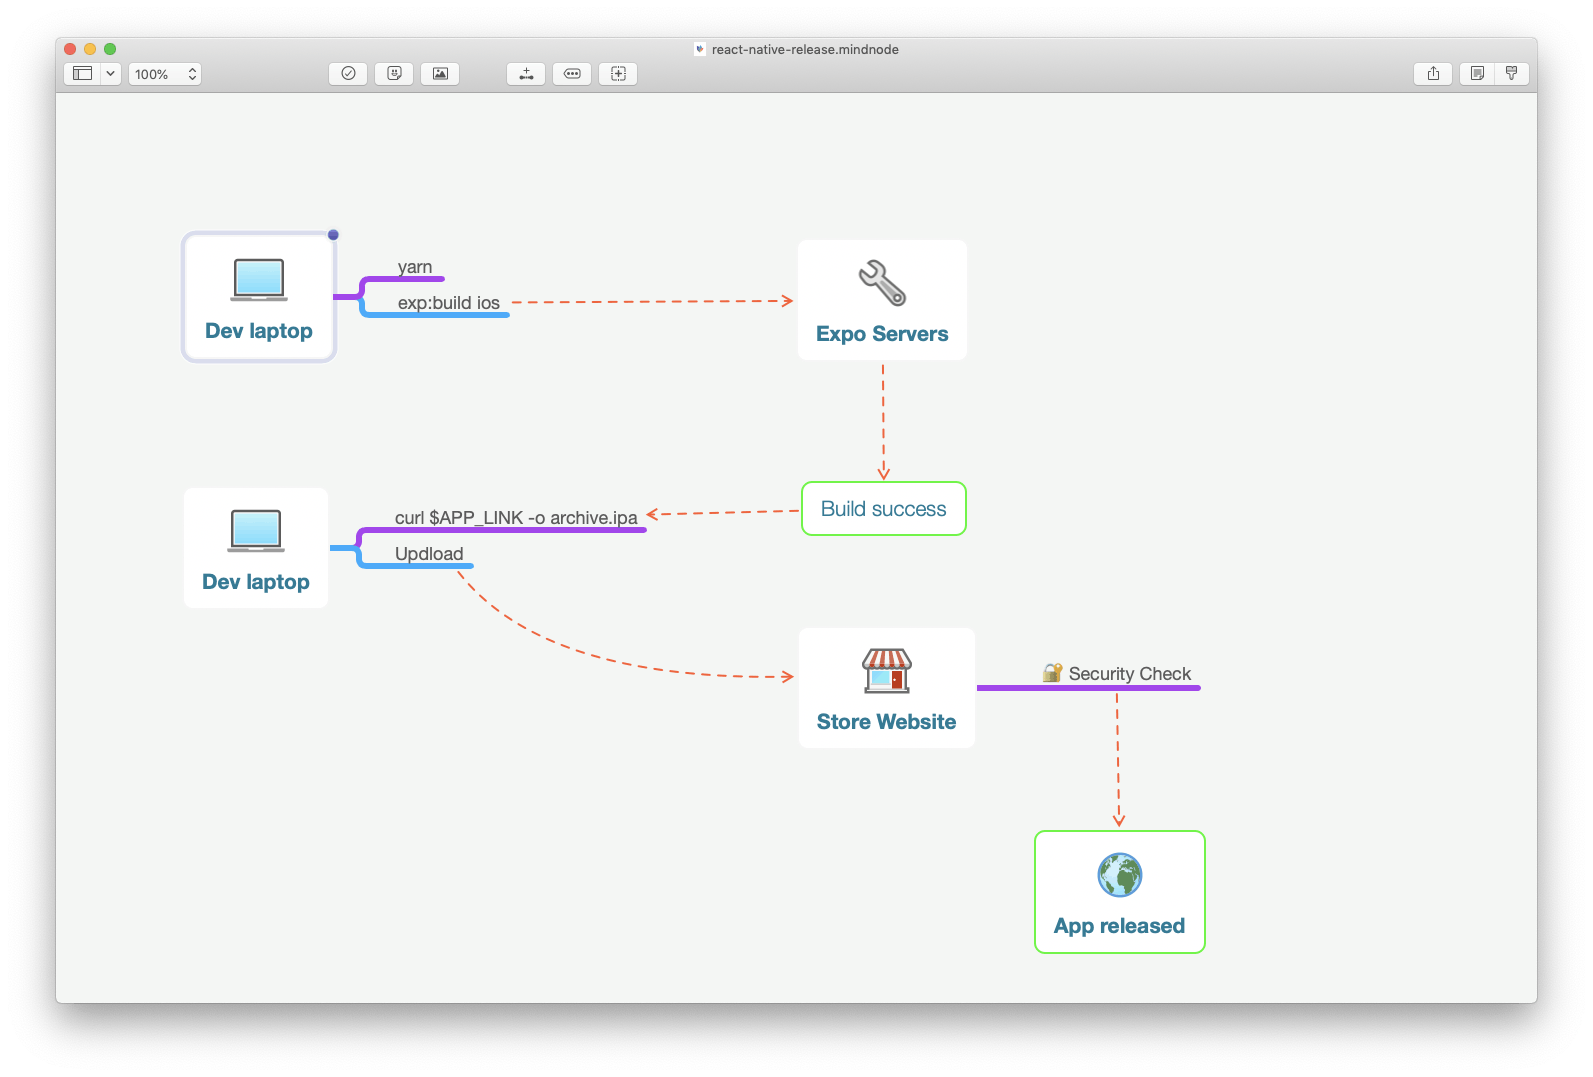 Application component tree